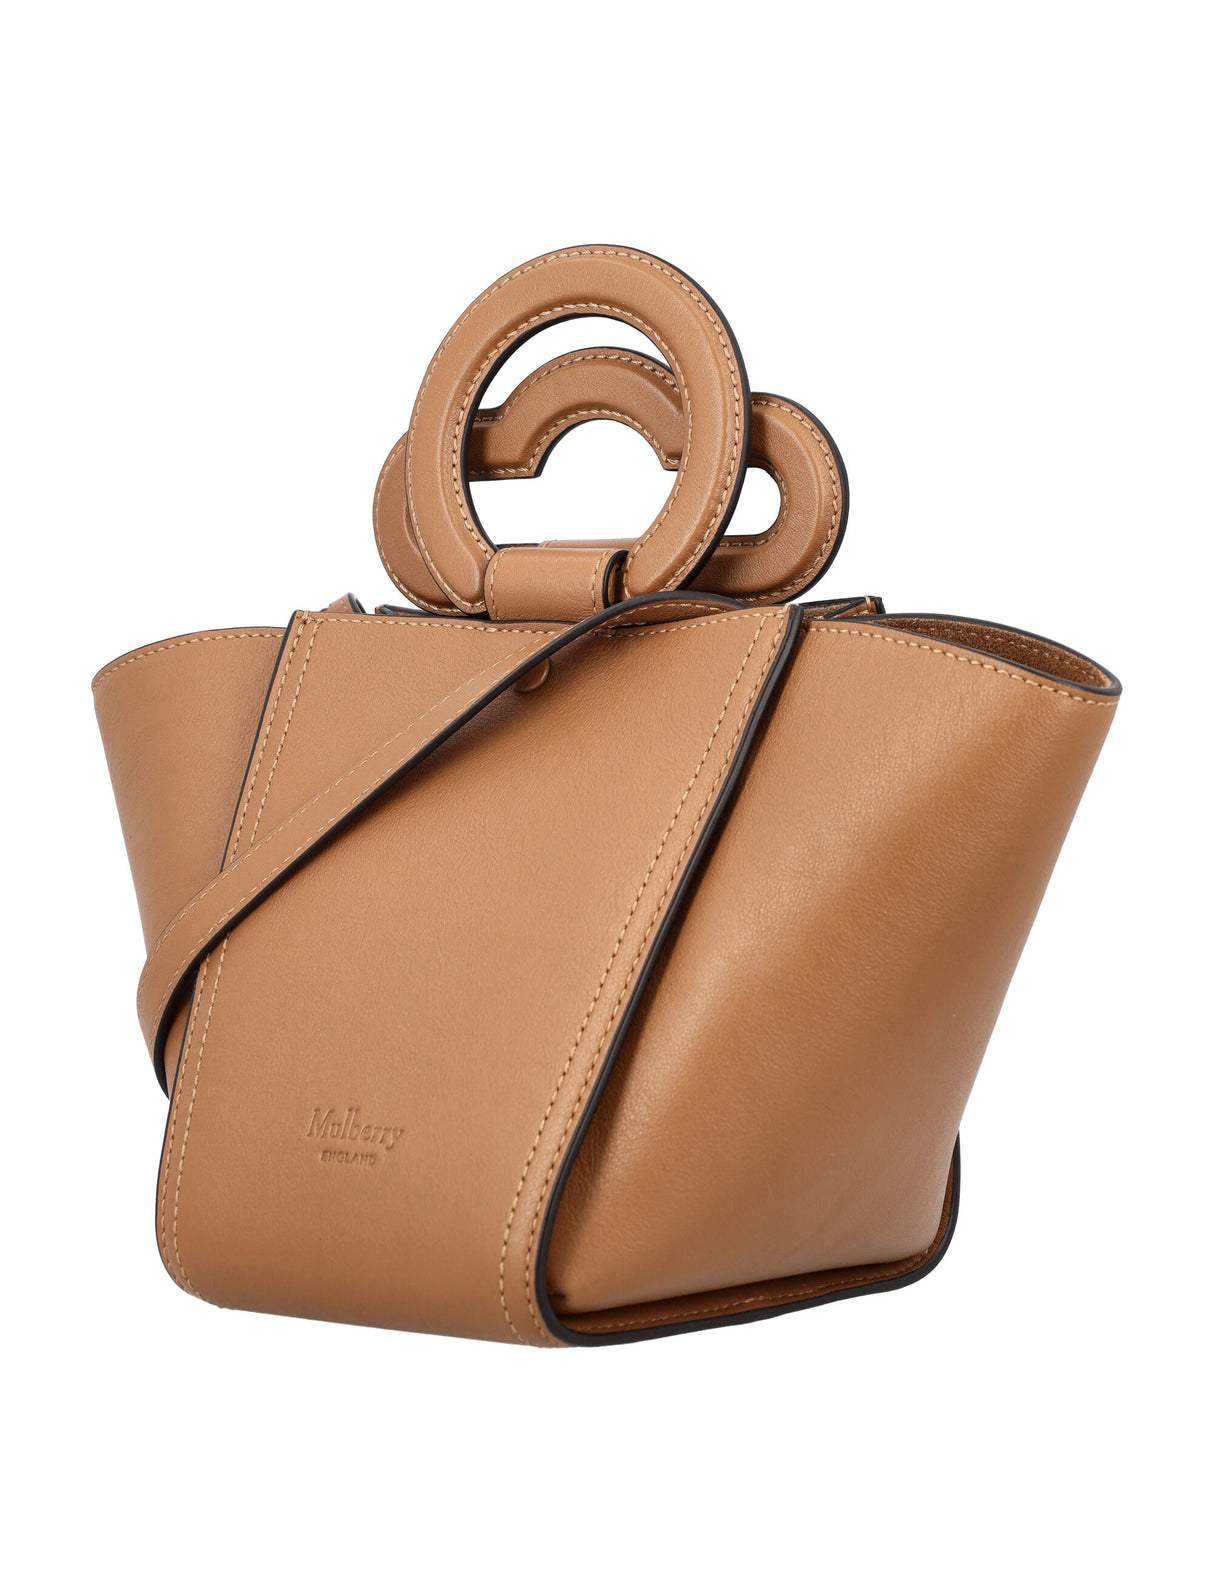 MULBERRY Mini Teak Leather Top-Handle Satchel with Shoulder Strap and Suede Lining, 26x16.5x16 cm